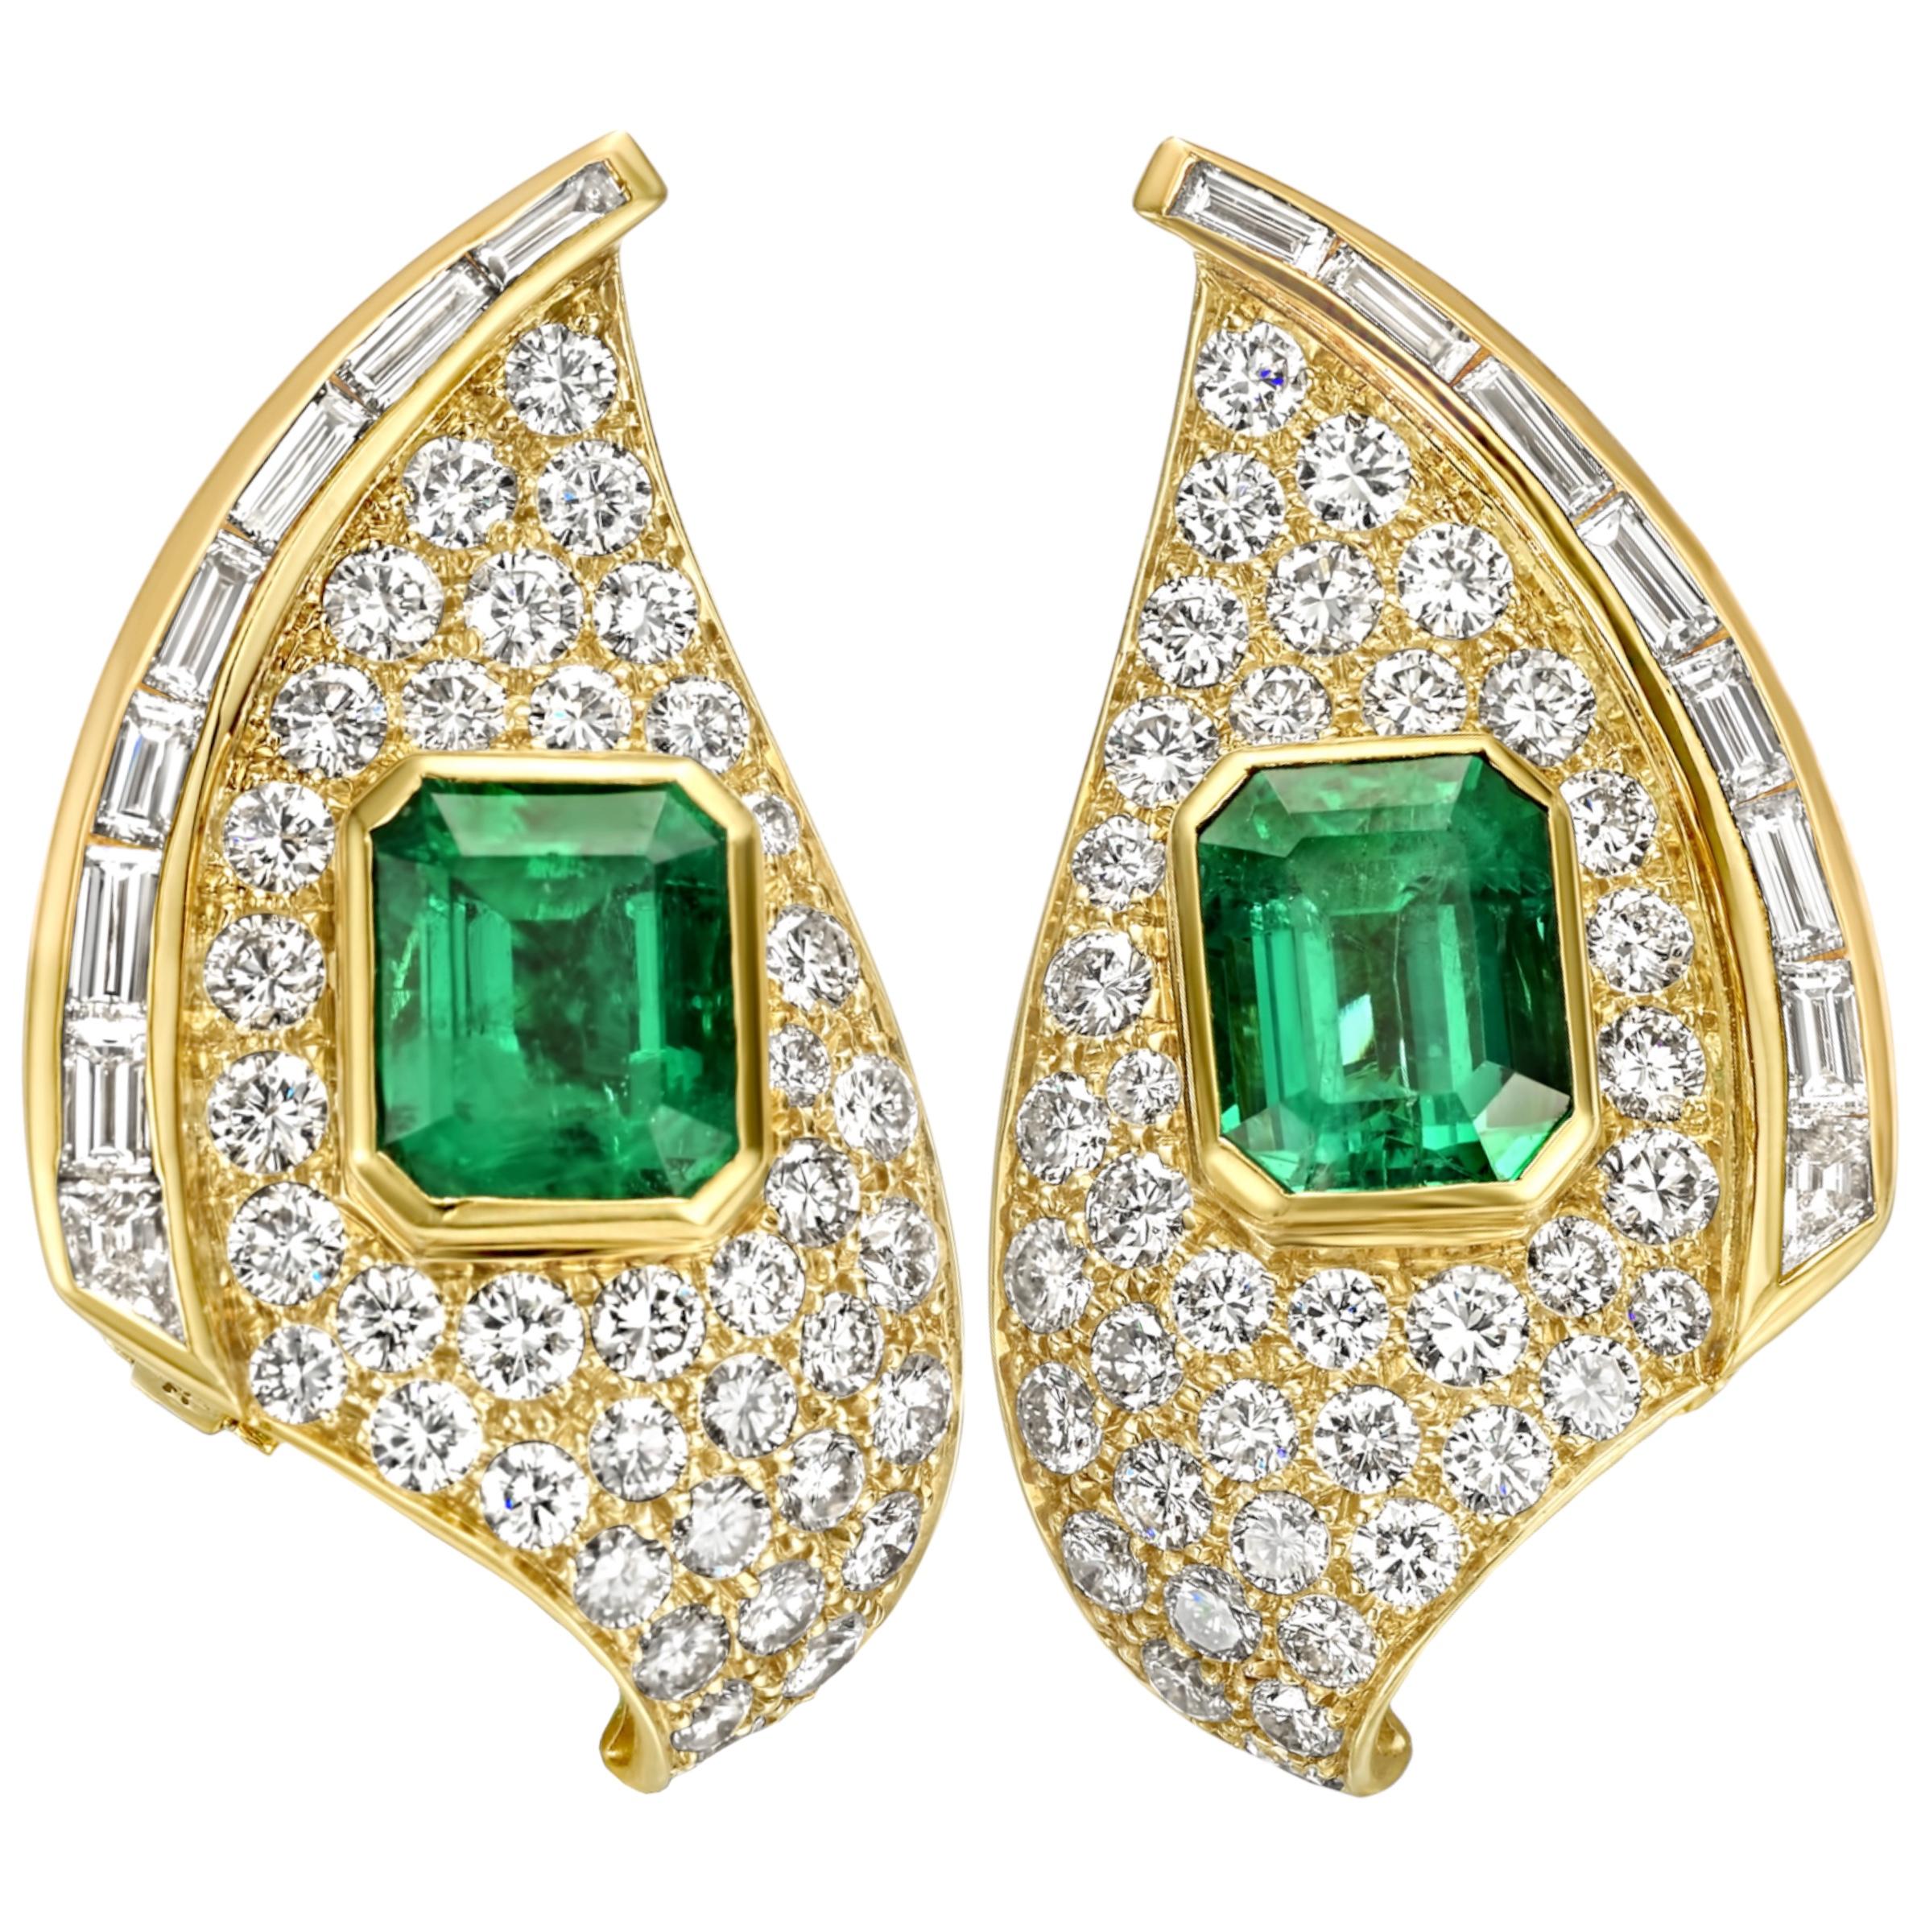 18 kt. Yellow Gold Adler Genève Set Necklace & Earrings With Emeralds & Diamonds For Sale 6